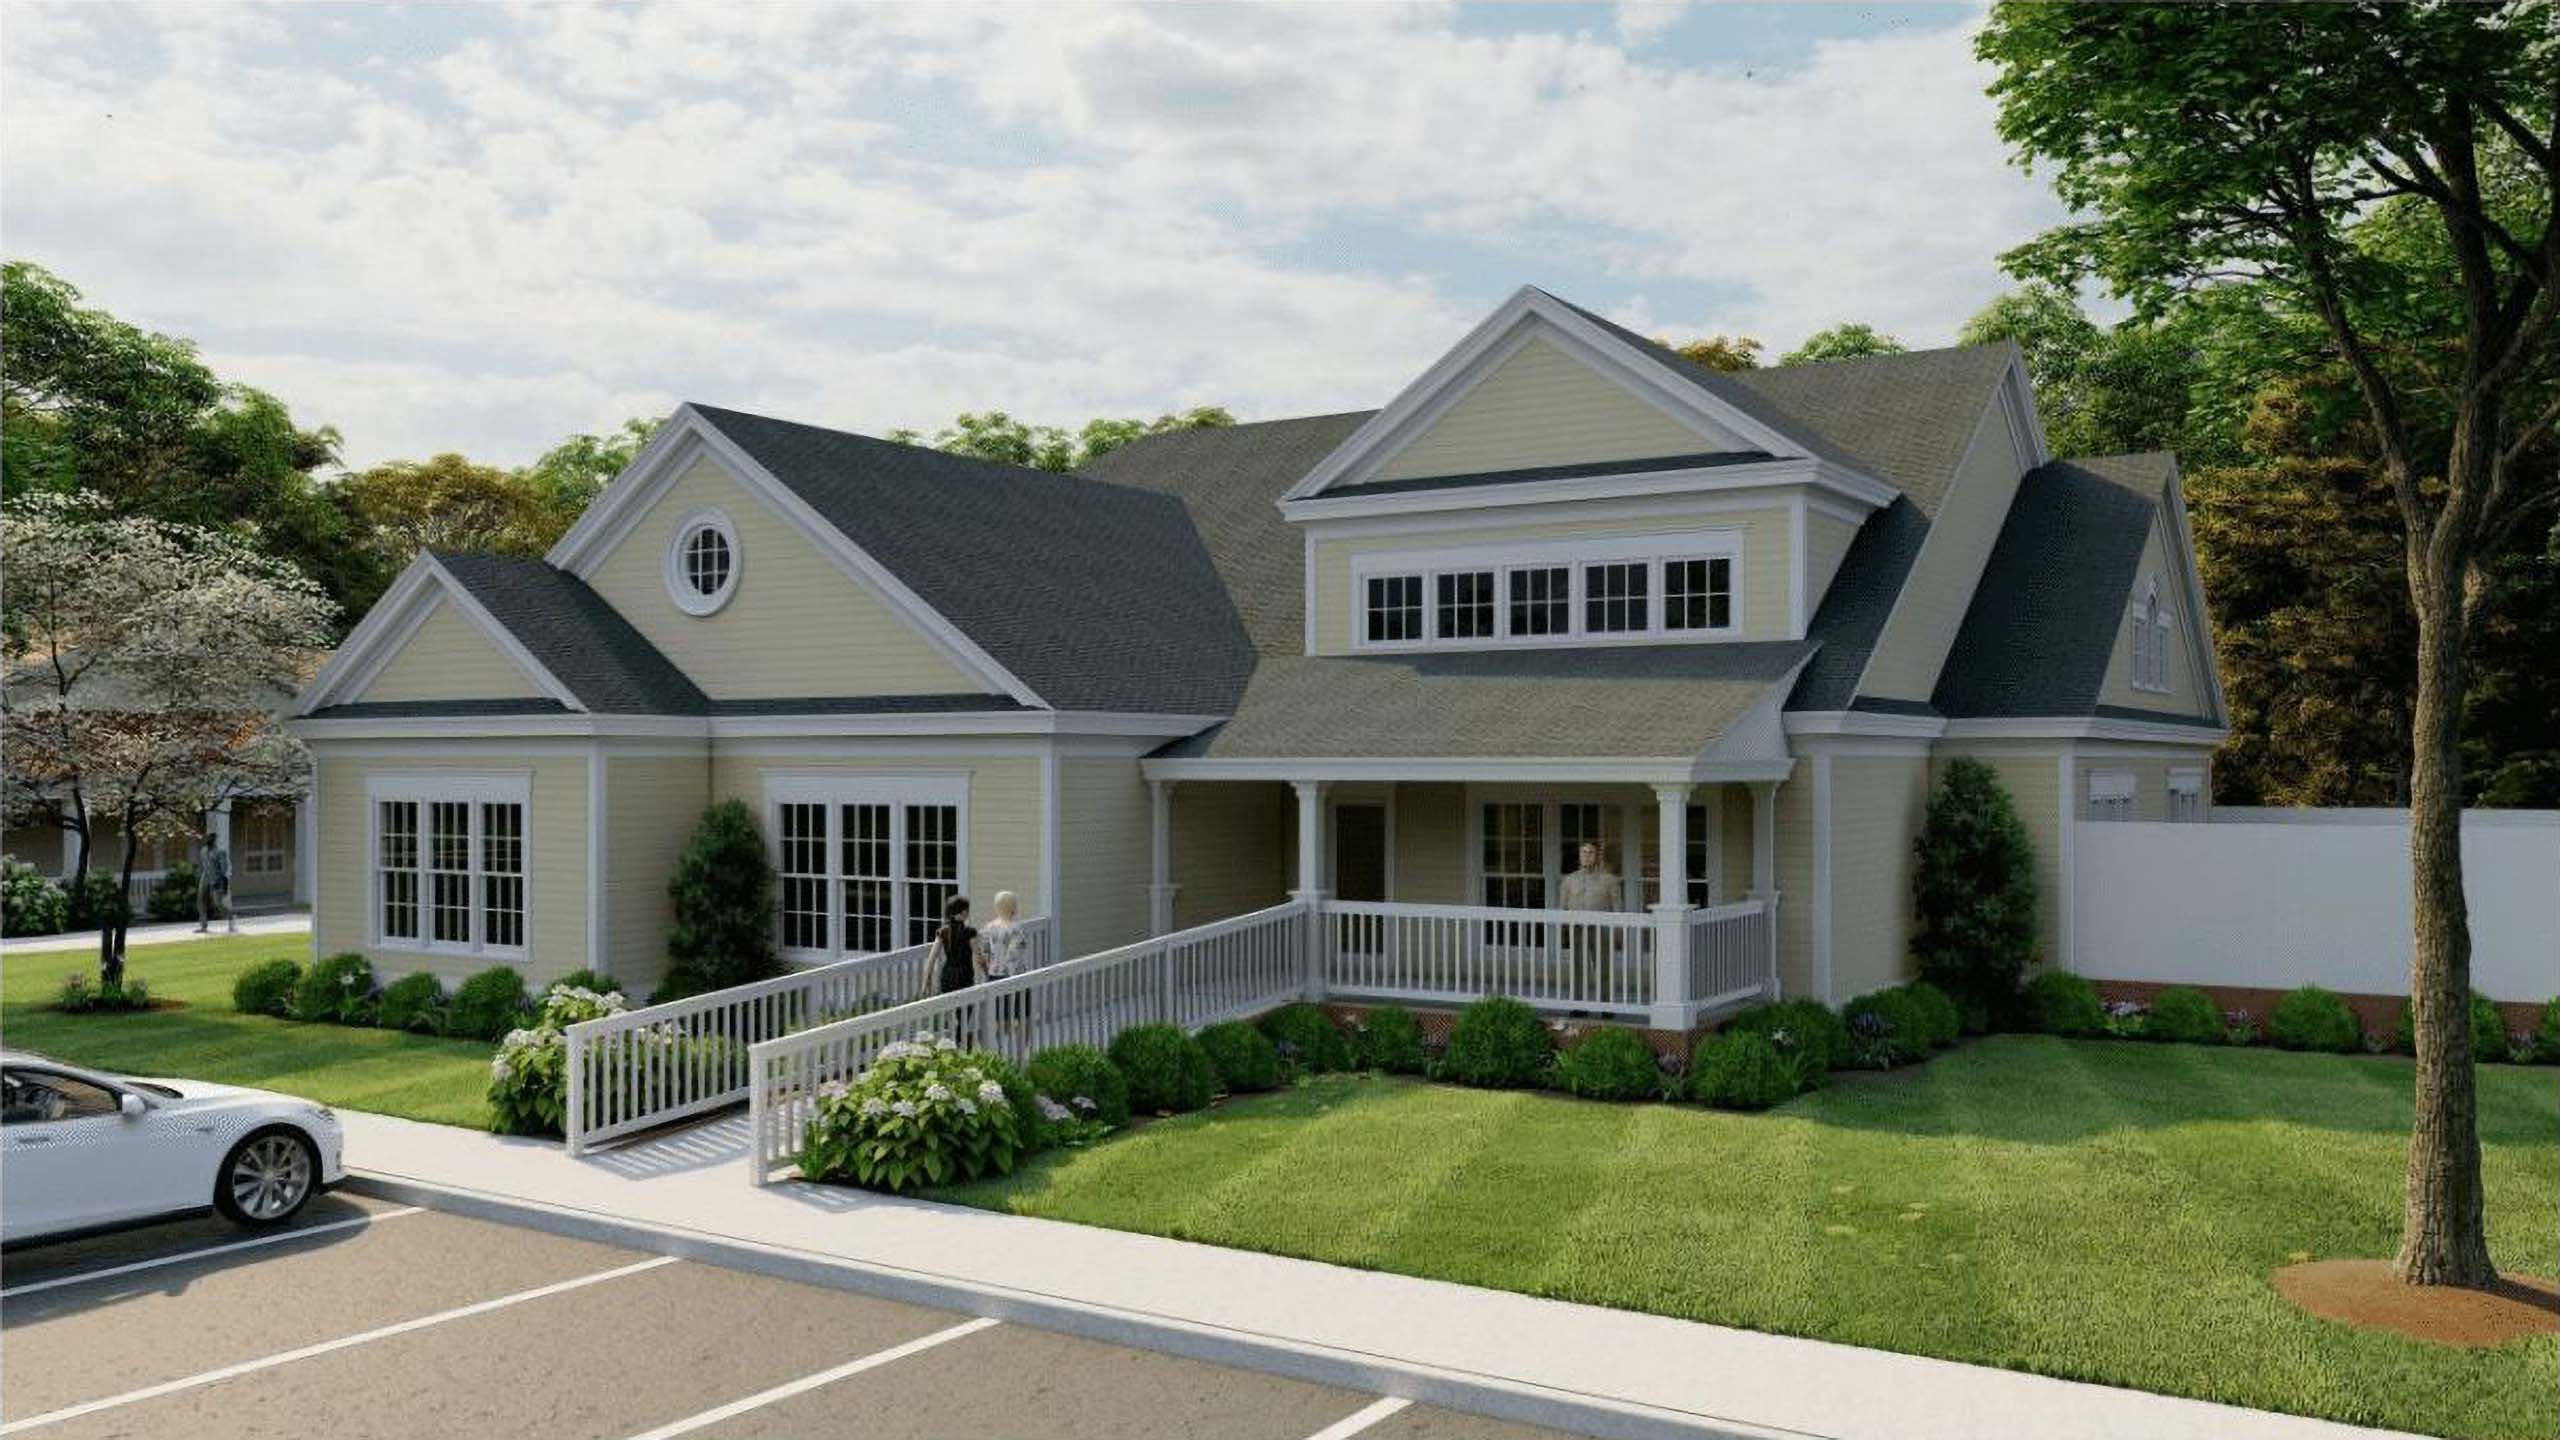 RWC Small House Rendering